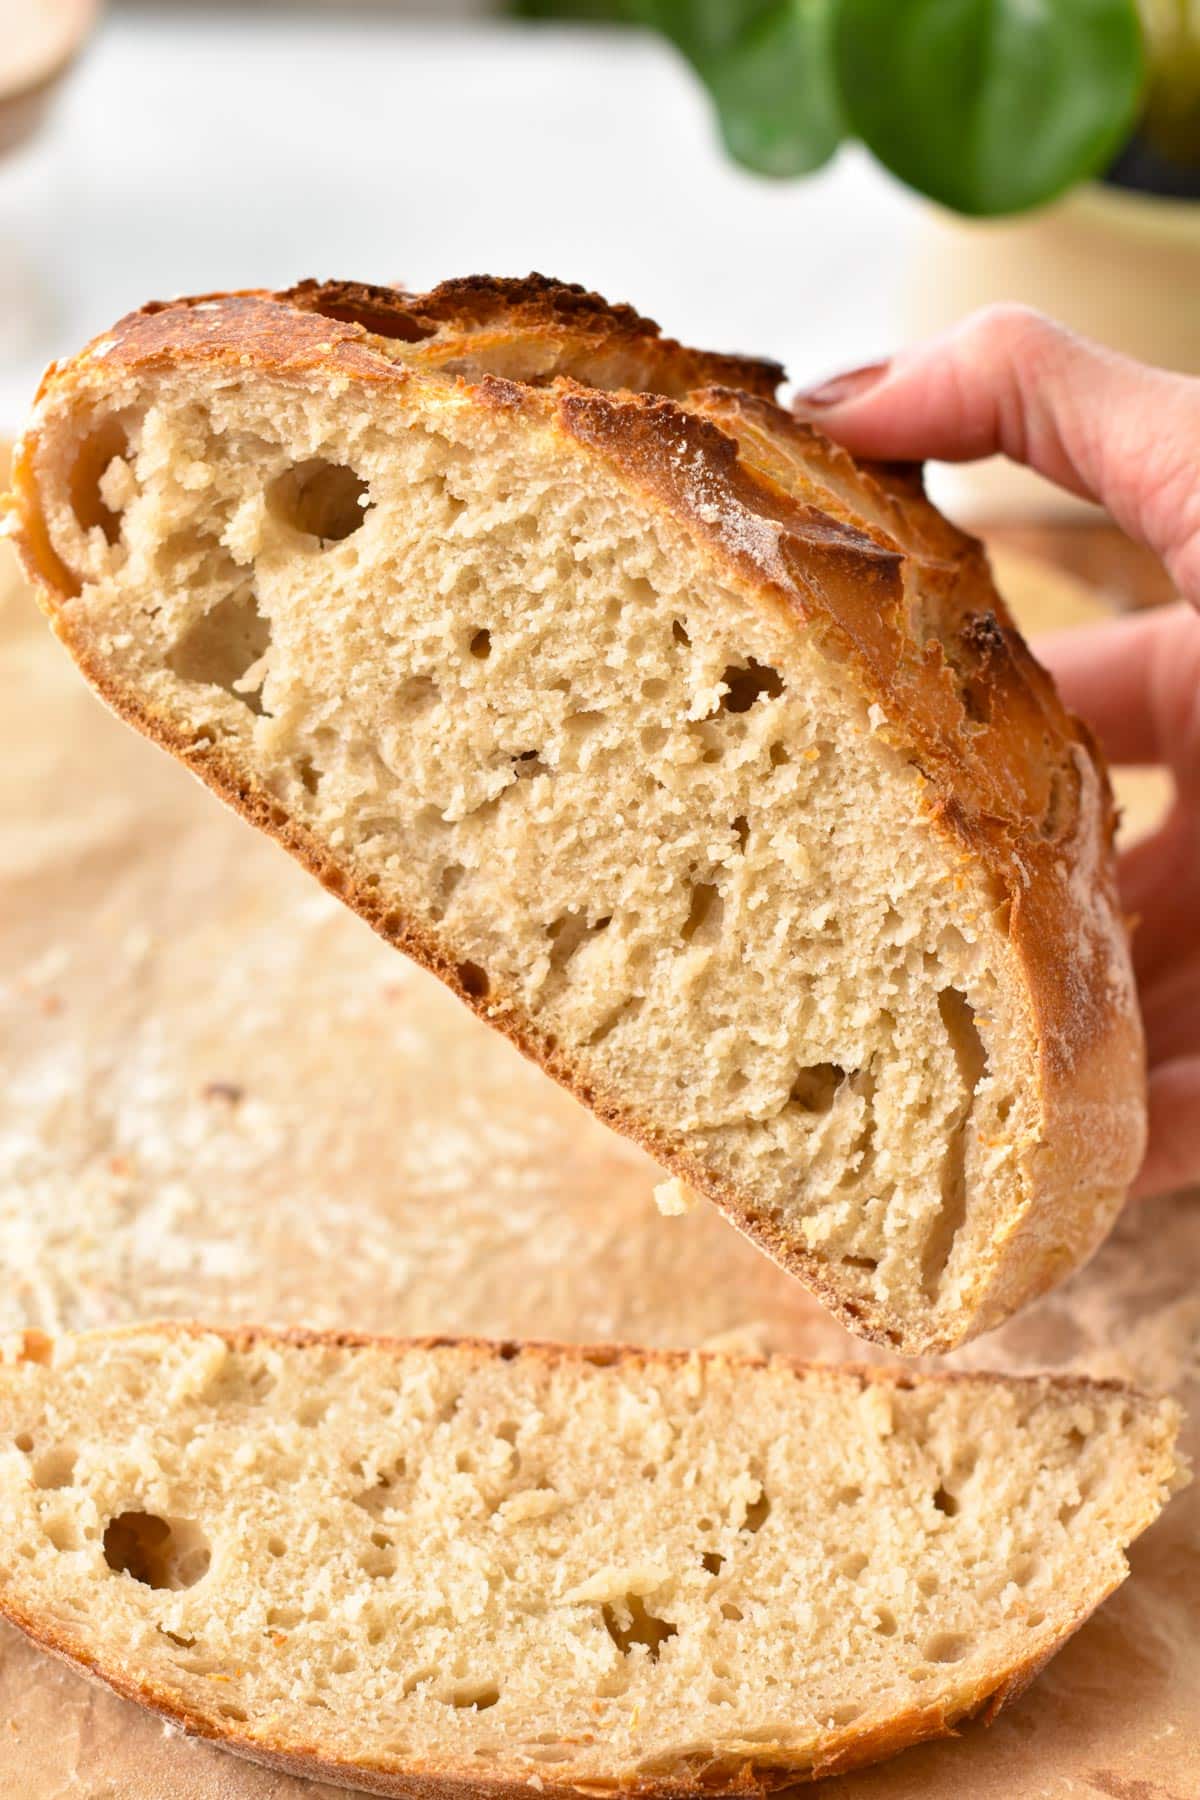 A hand holding a sliced loaf of artisan bread showing the texture of the bread crumb.